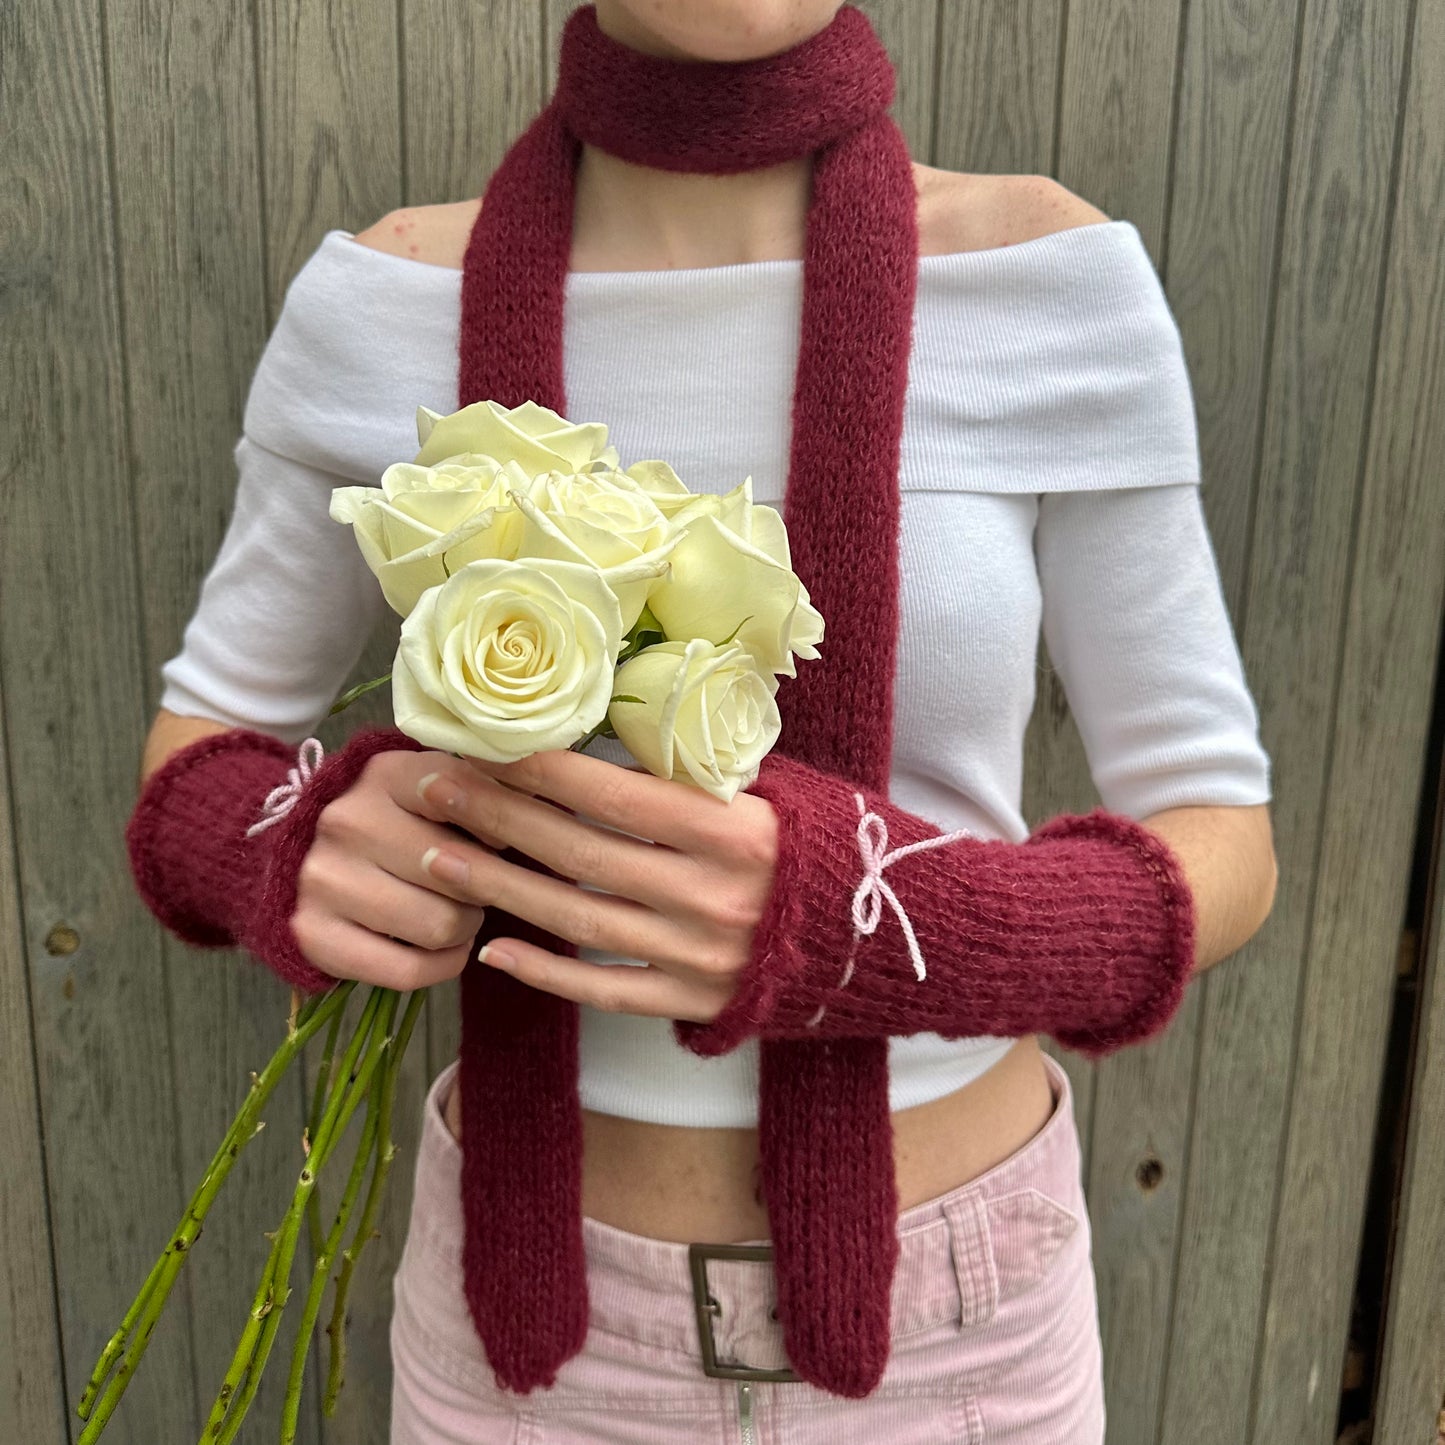 Handmade knitted mohair hand warmers in burgundy and baby pink - with thumb hole